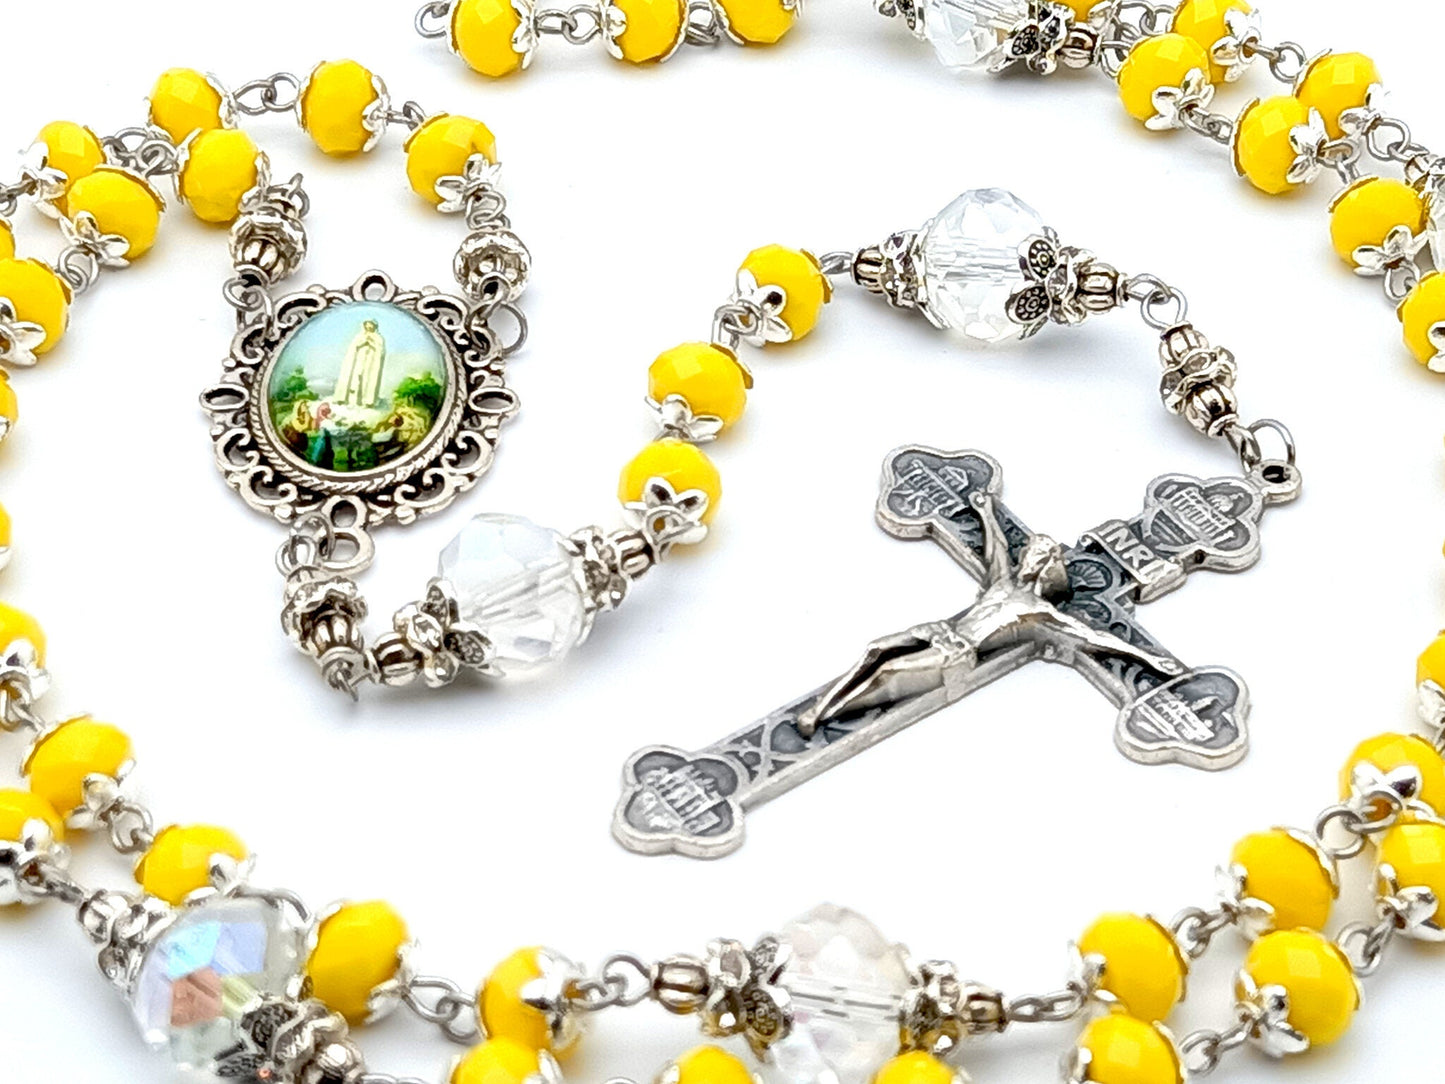 Our Lady of Fatima unique rosary beads with yellow faceted and clear glass beads, silver crucifix and picture centre medal.